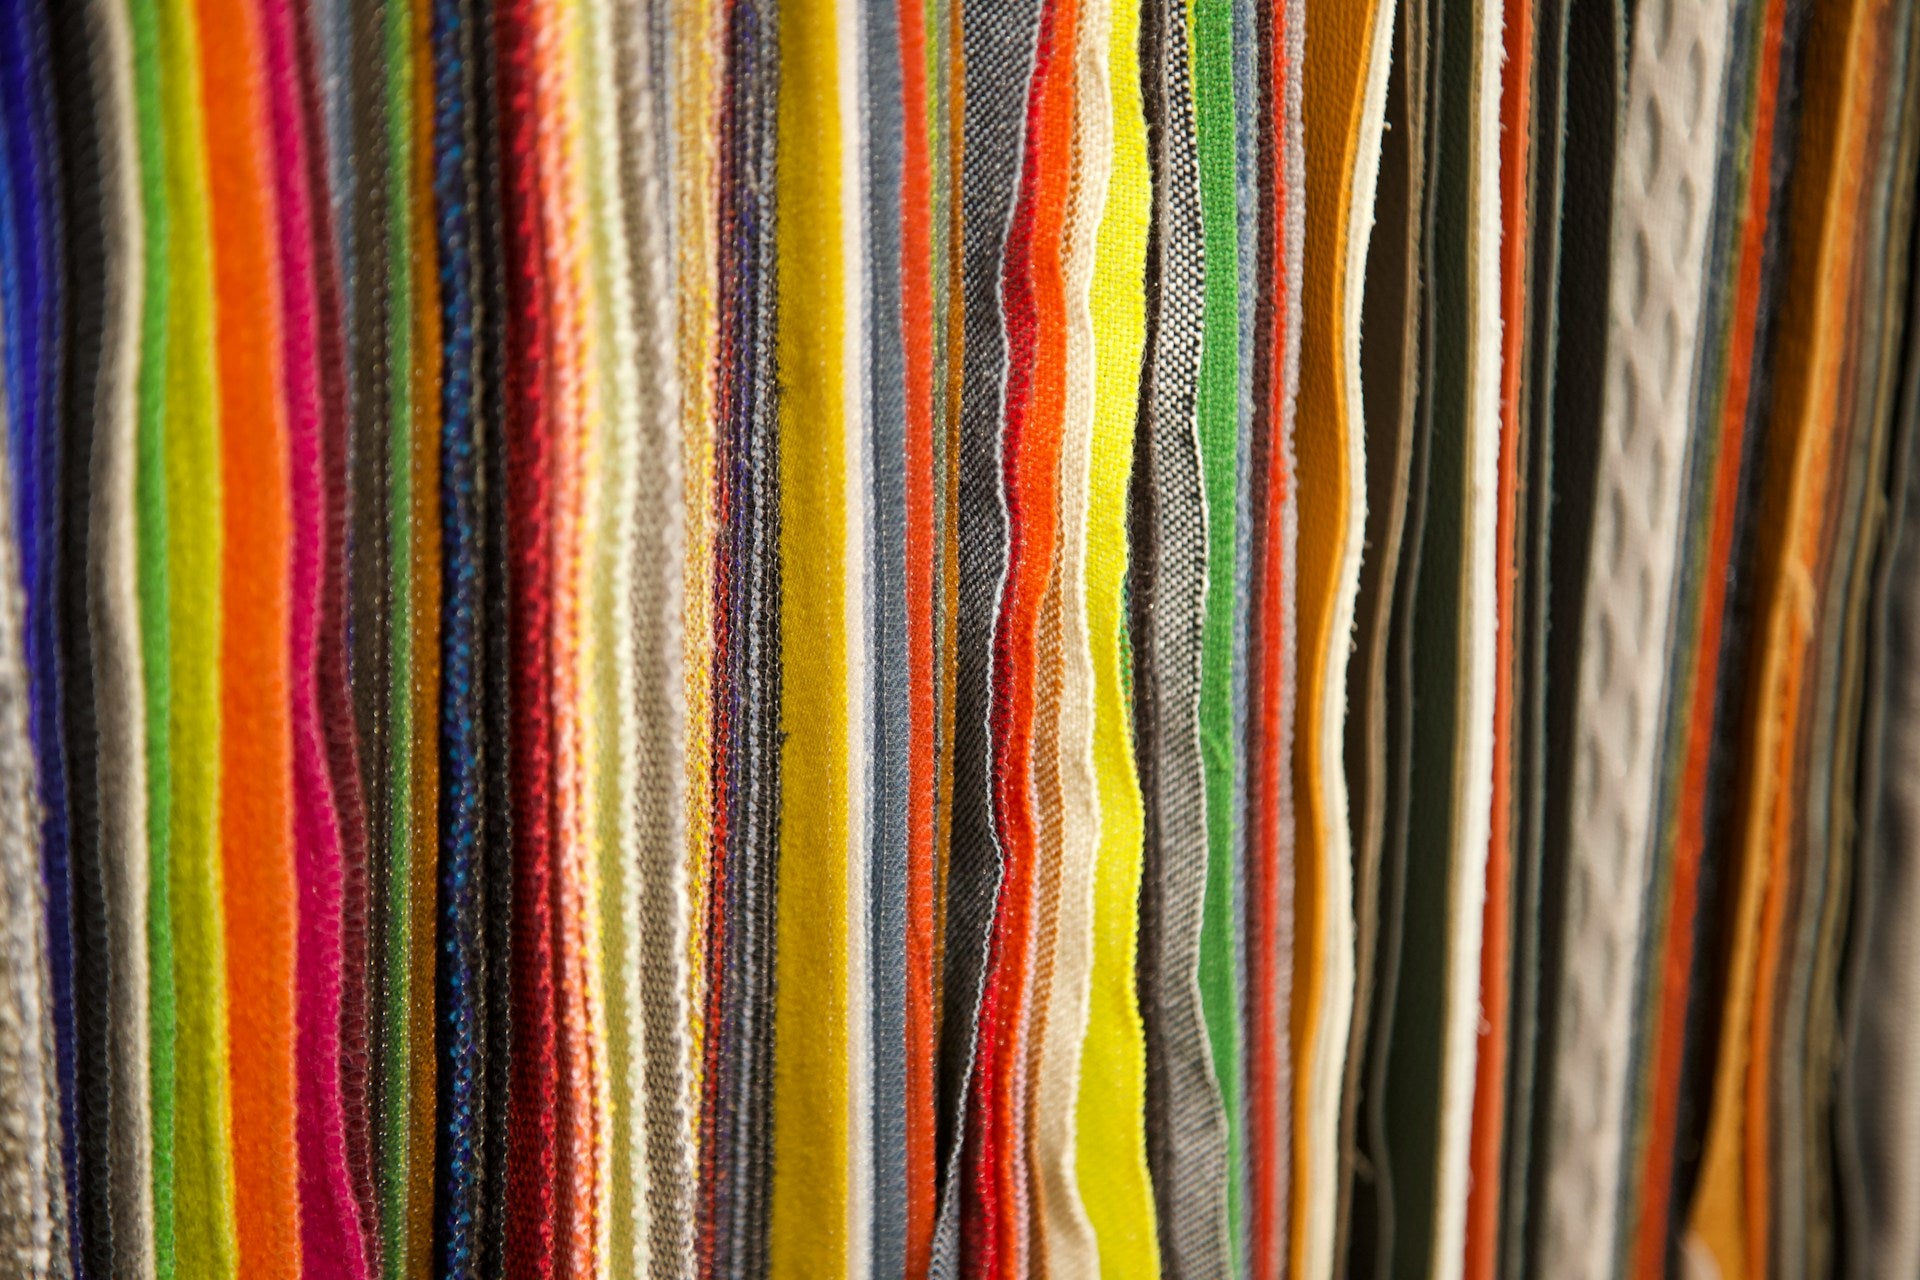 A close up of a row of colorful fabric.